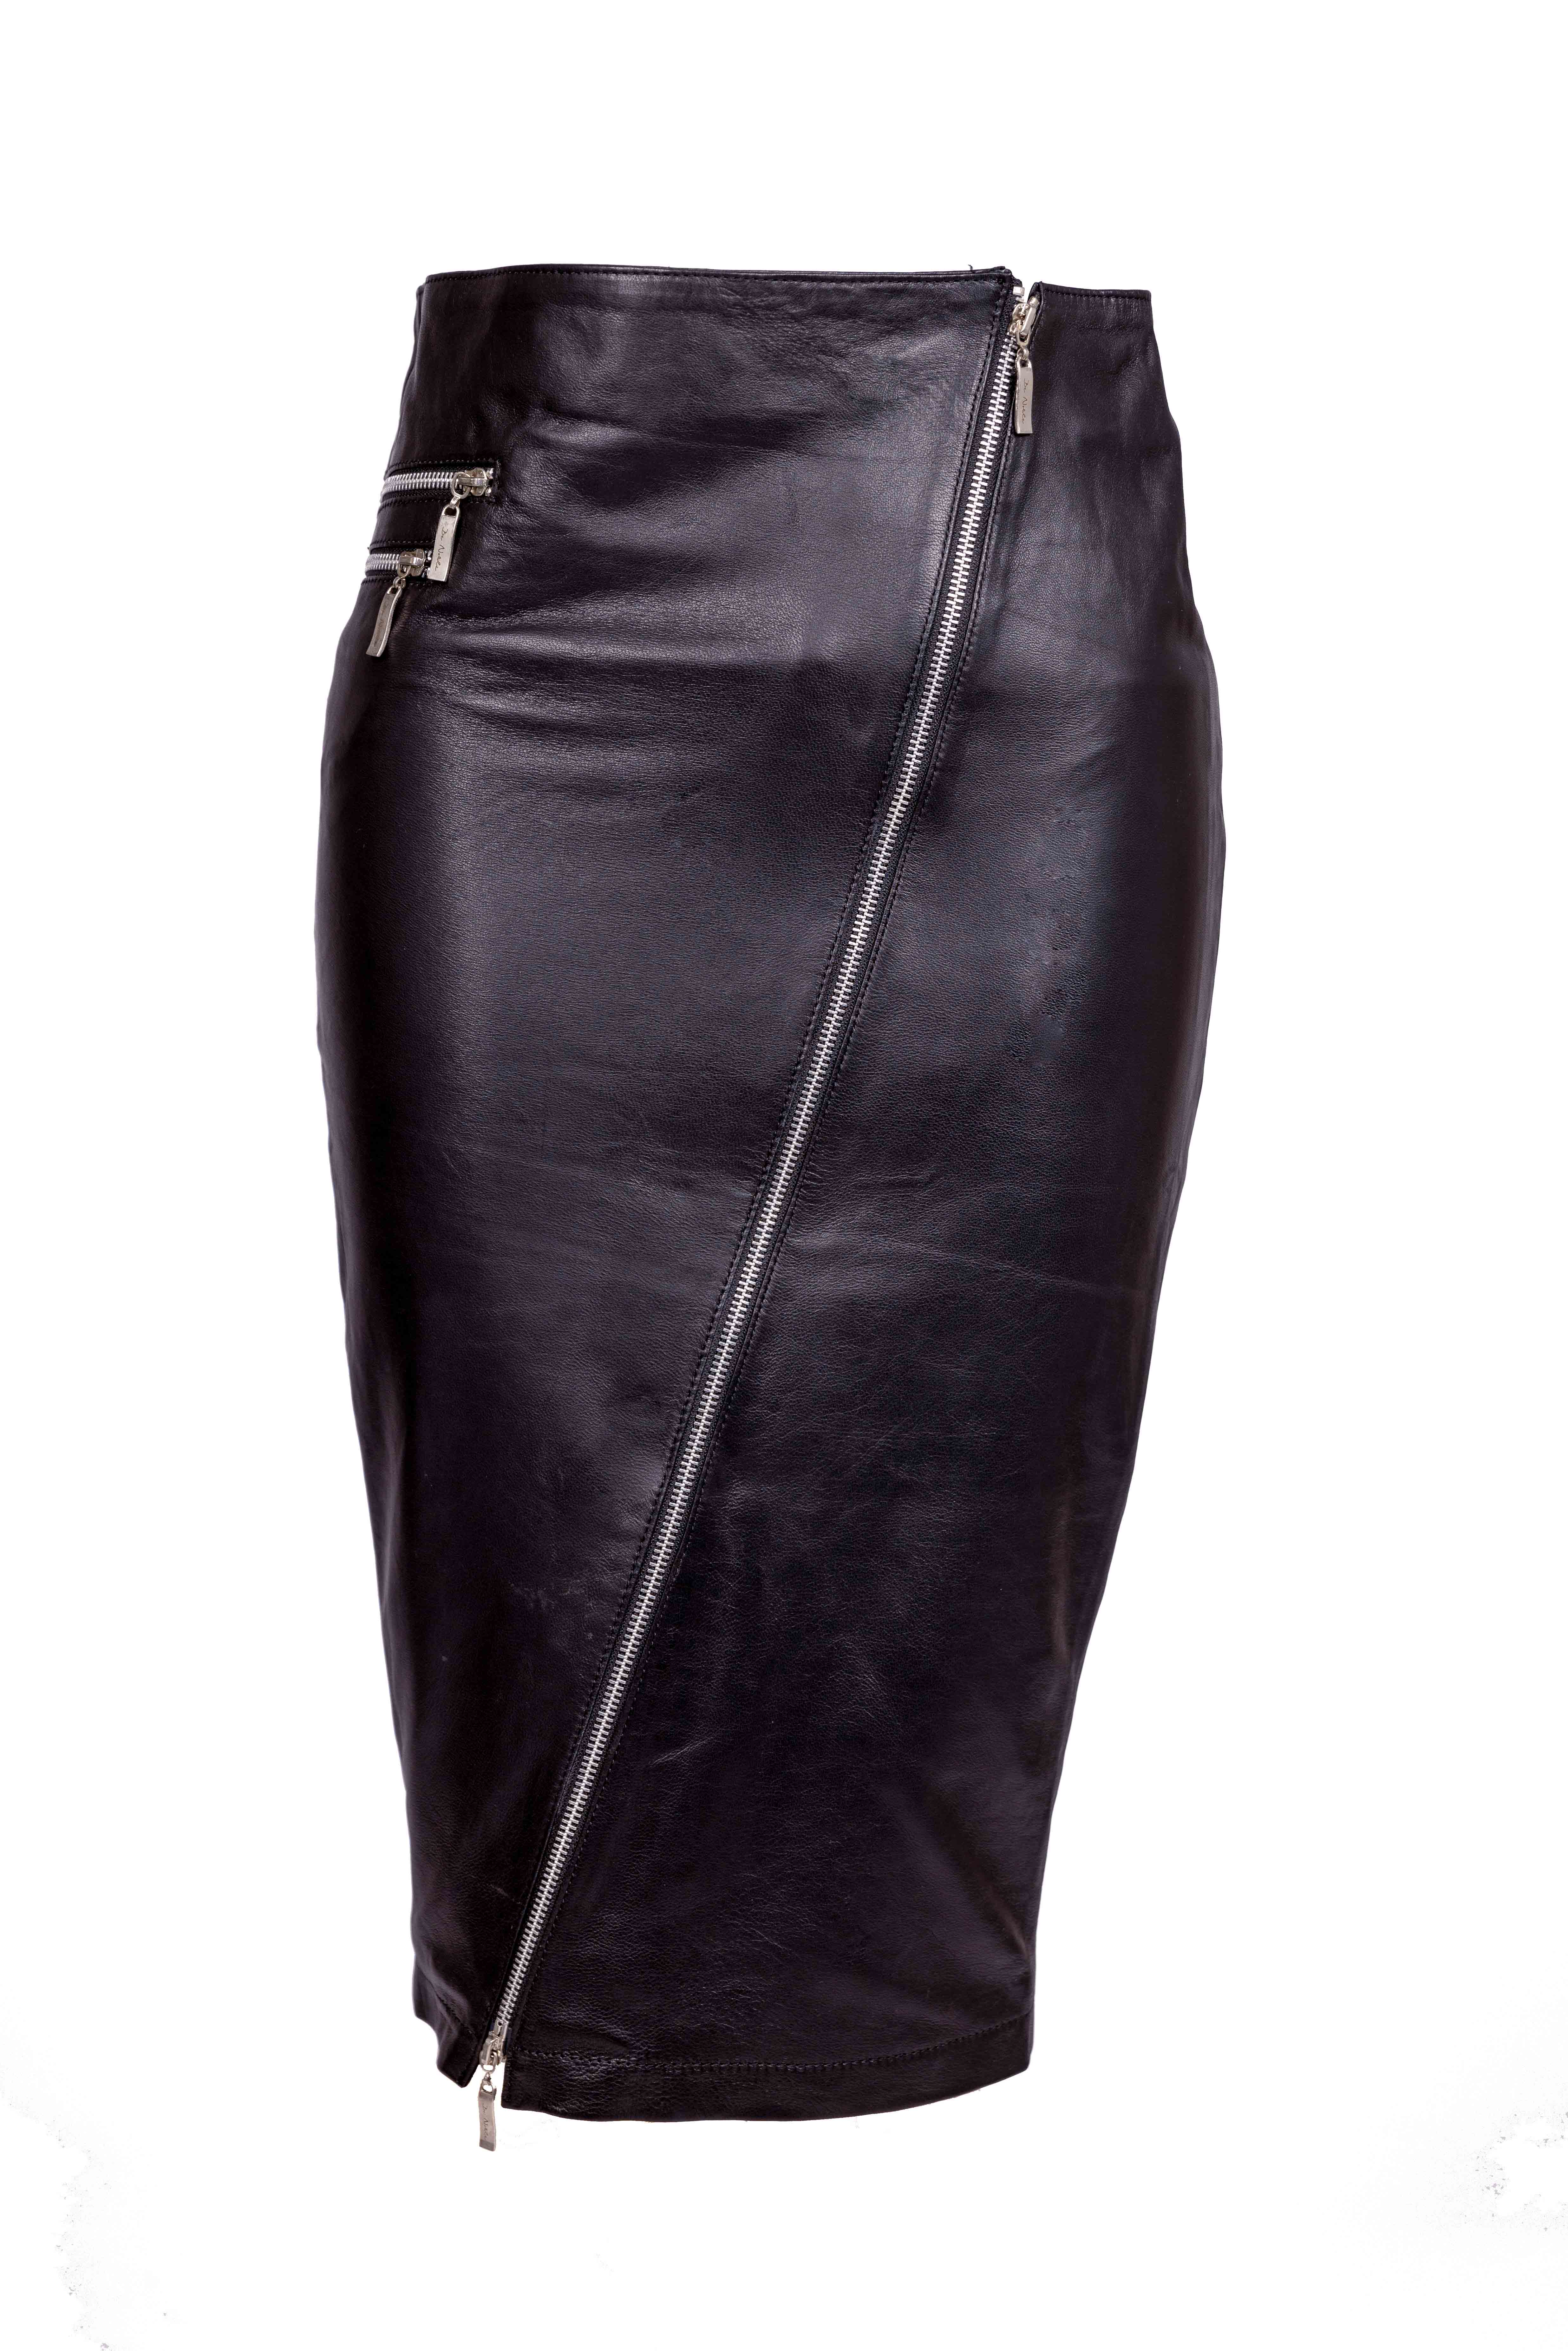 Leather skirt pencil skirt in high waist made of GENUINE leather